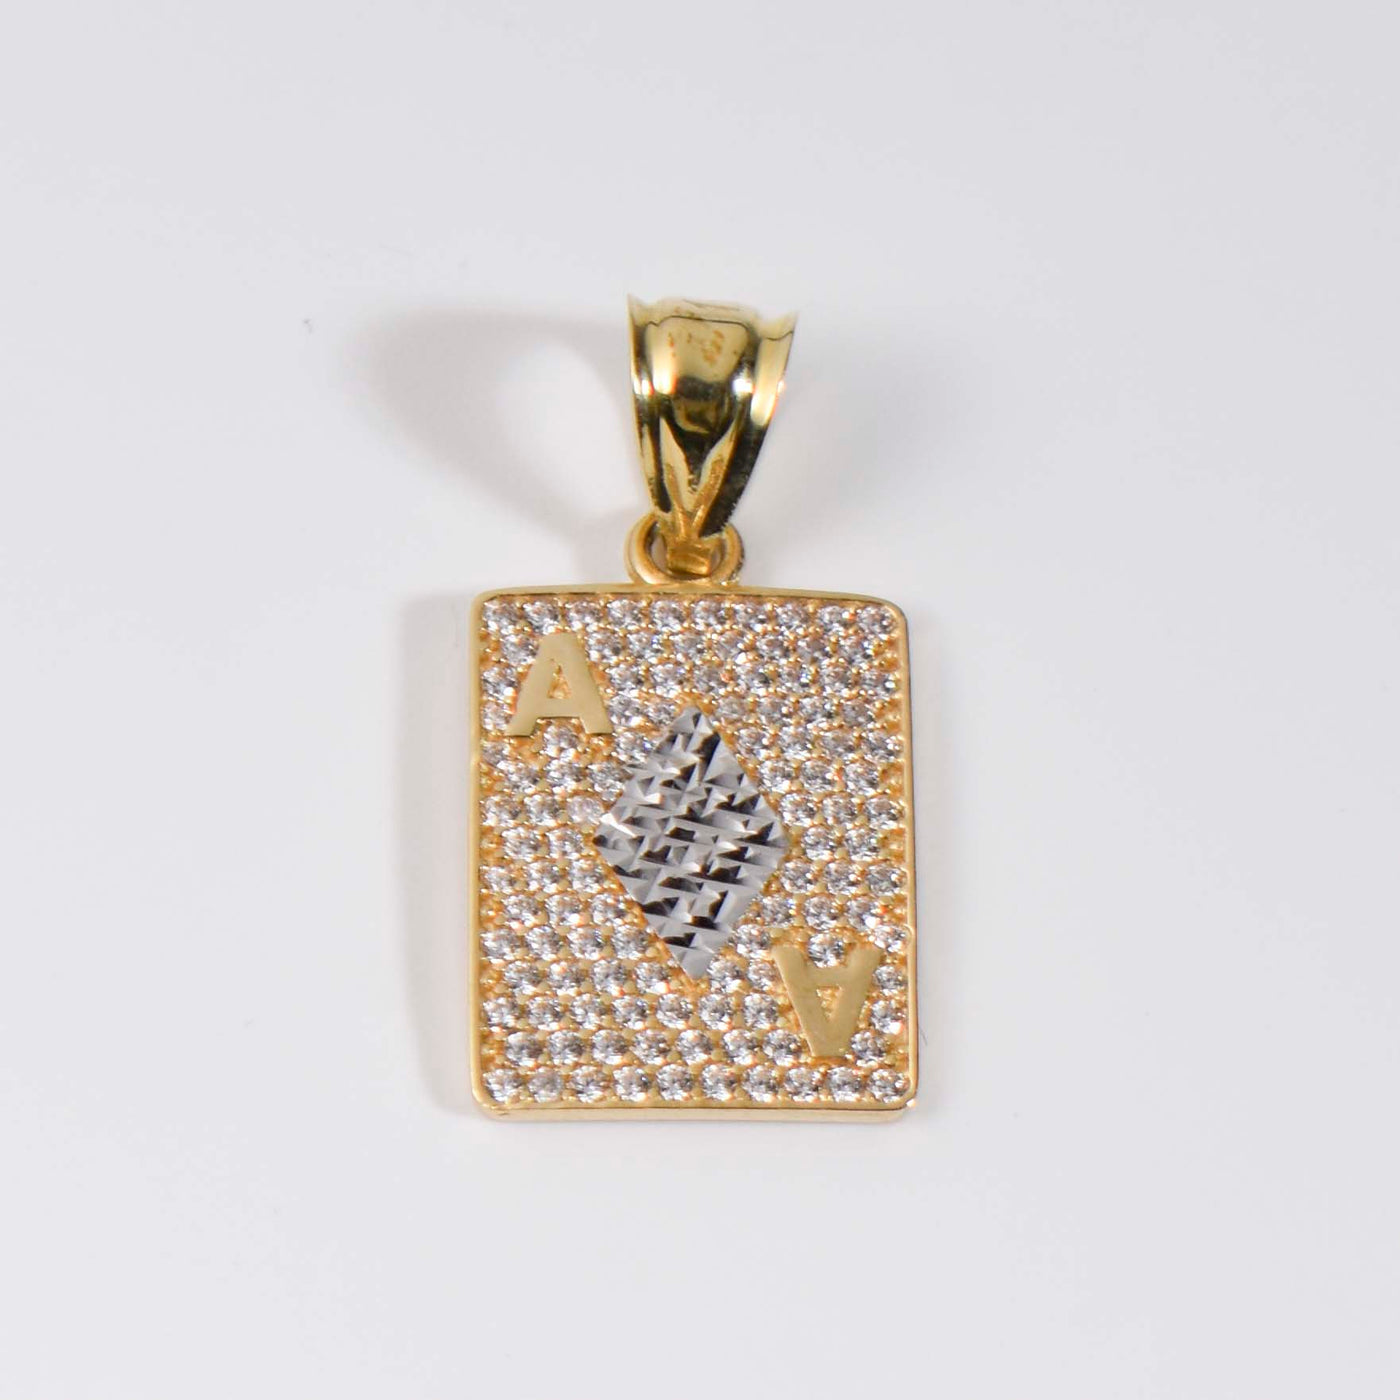 CZ Ace of Spades Playing Card Pendant 10K Yellow Gold